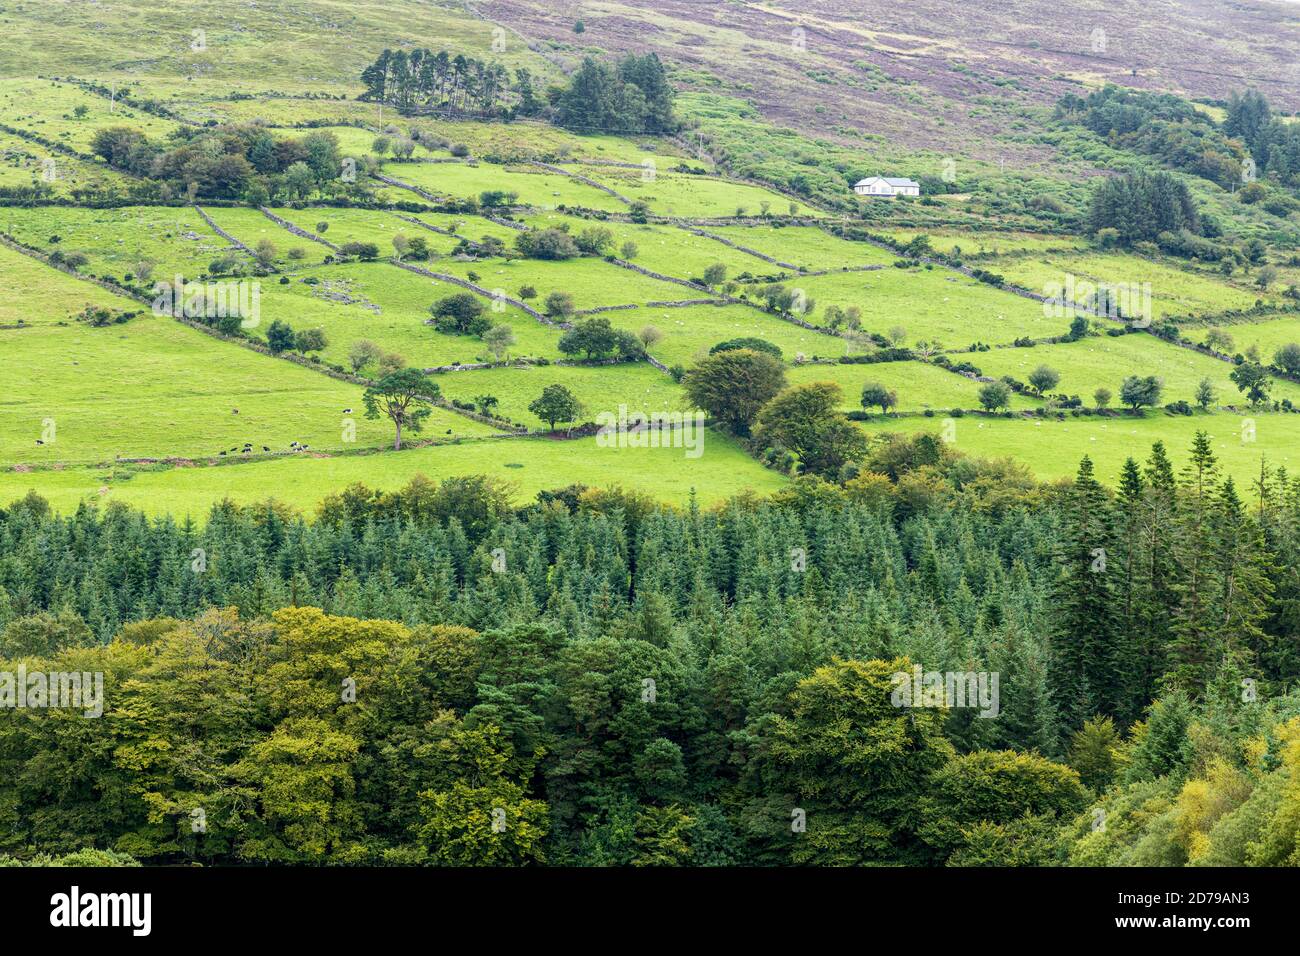 Views over green fields in the valley from Galtee Castle woods, Galtee mountains, County Limerick, Ireland Stock Photo